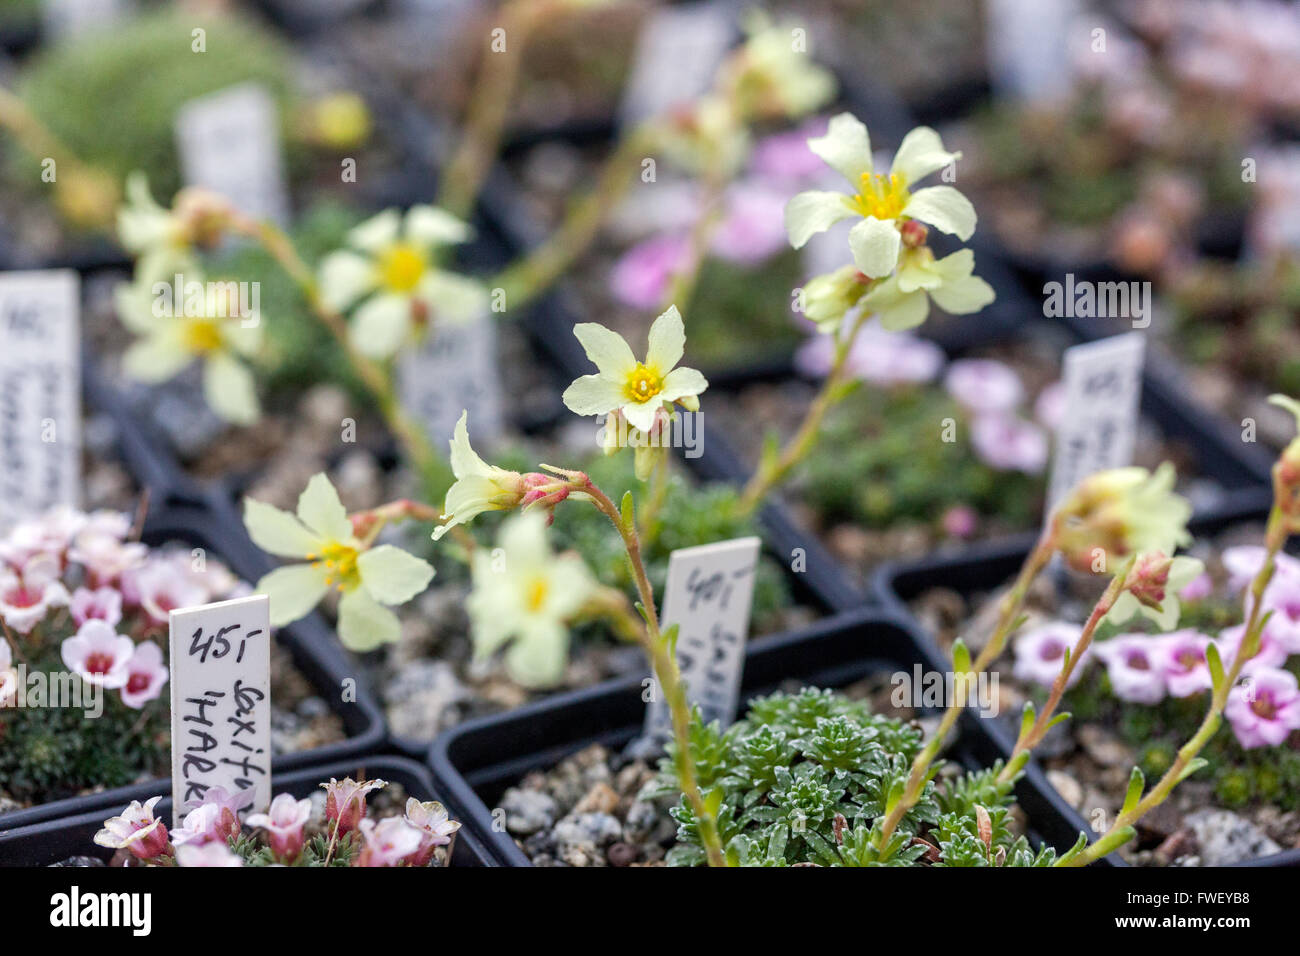 Rockery plants in pots for sale Farmers Market Alpine saxifrages Stock Photo